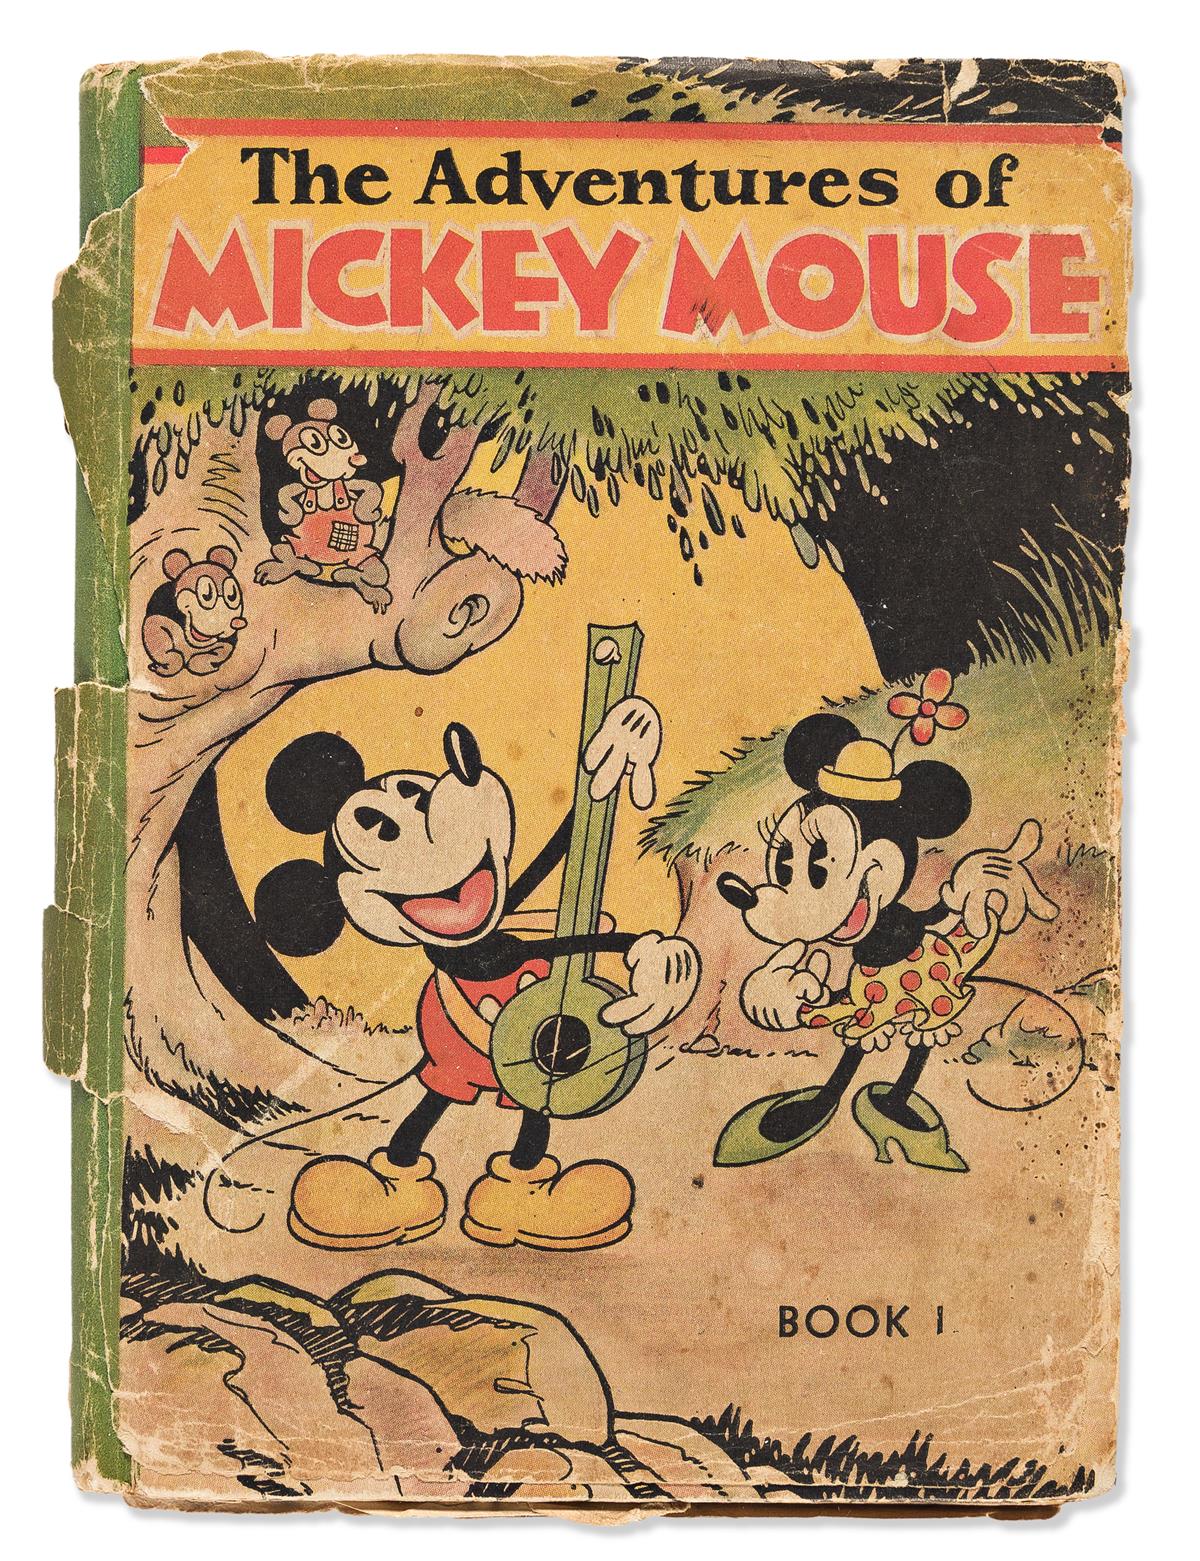 (CHILDRENS LITERATURE.) Walt Disney Studios. The Adventures of Mickey Mouse. Book I.